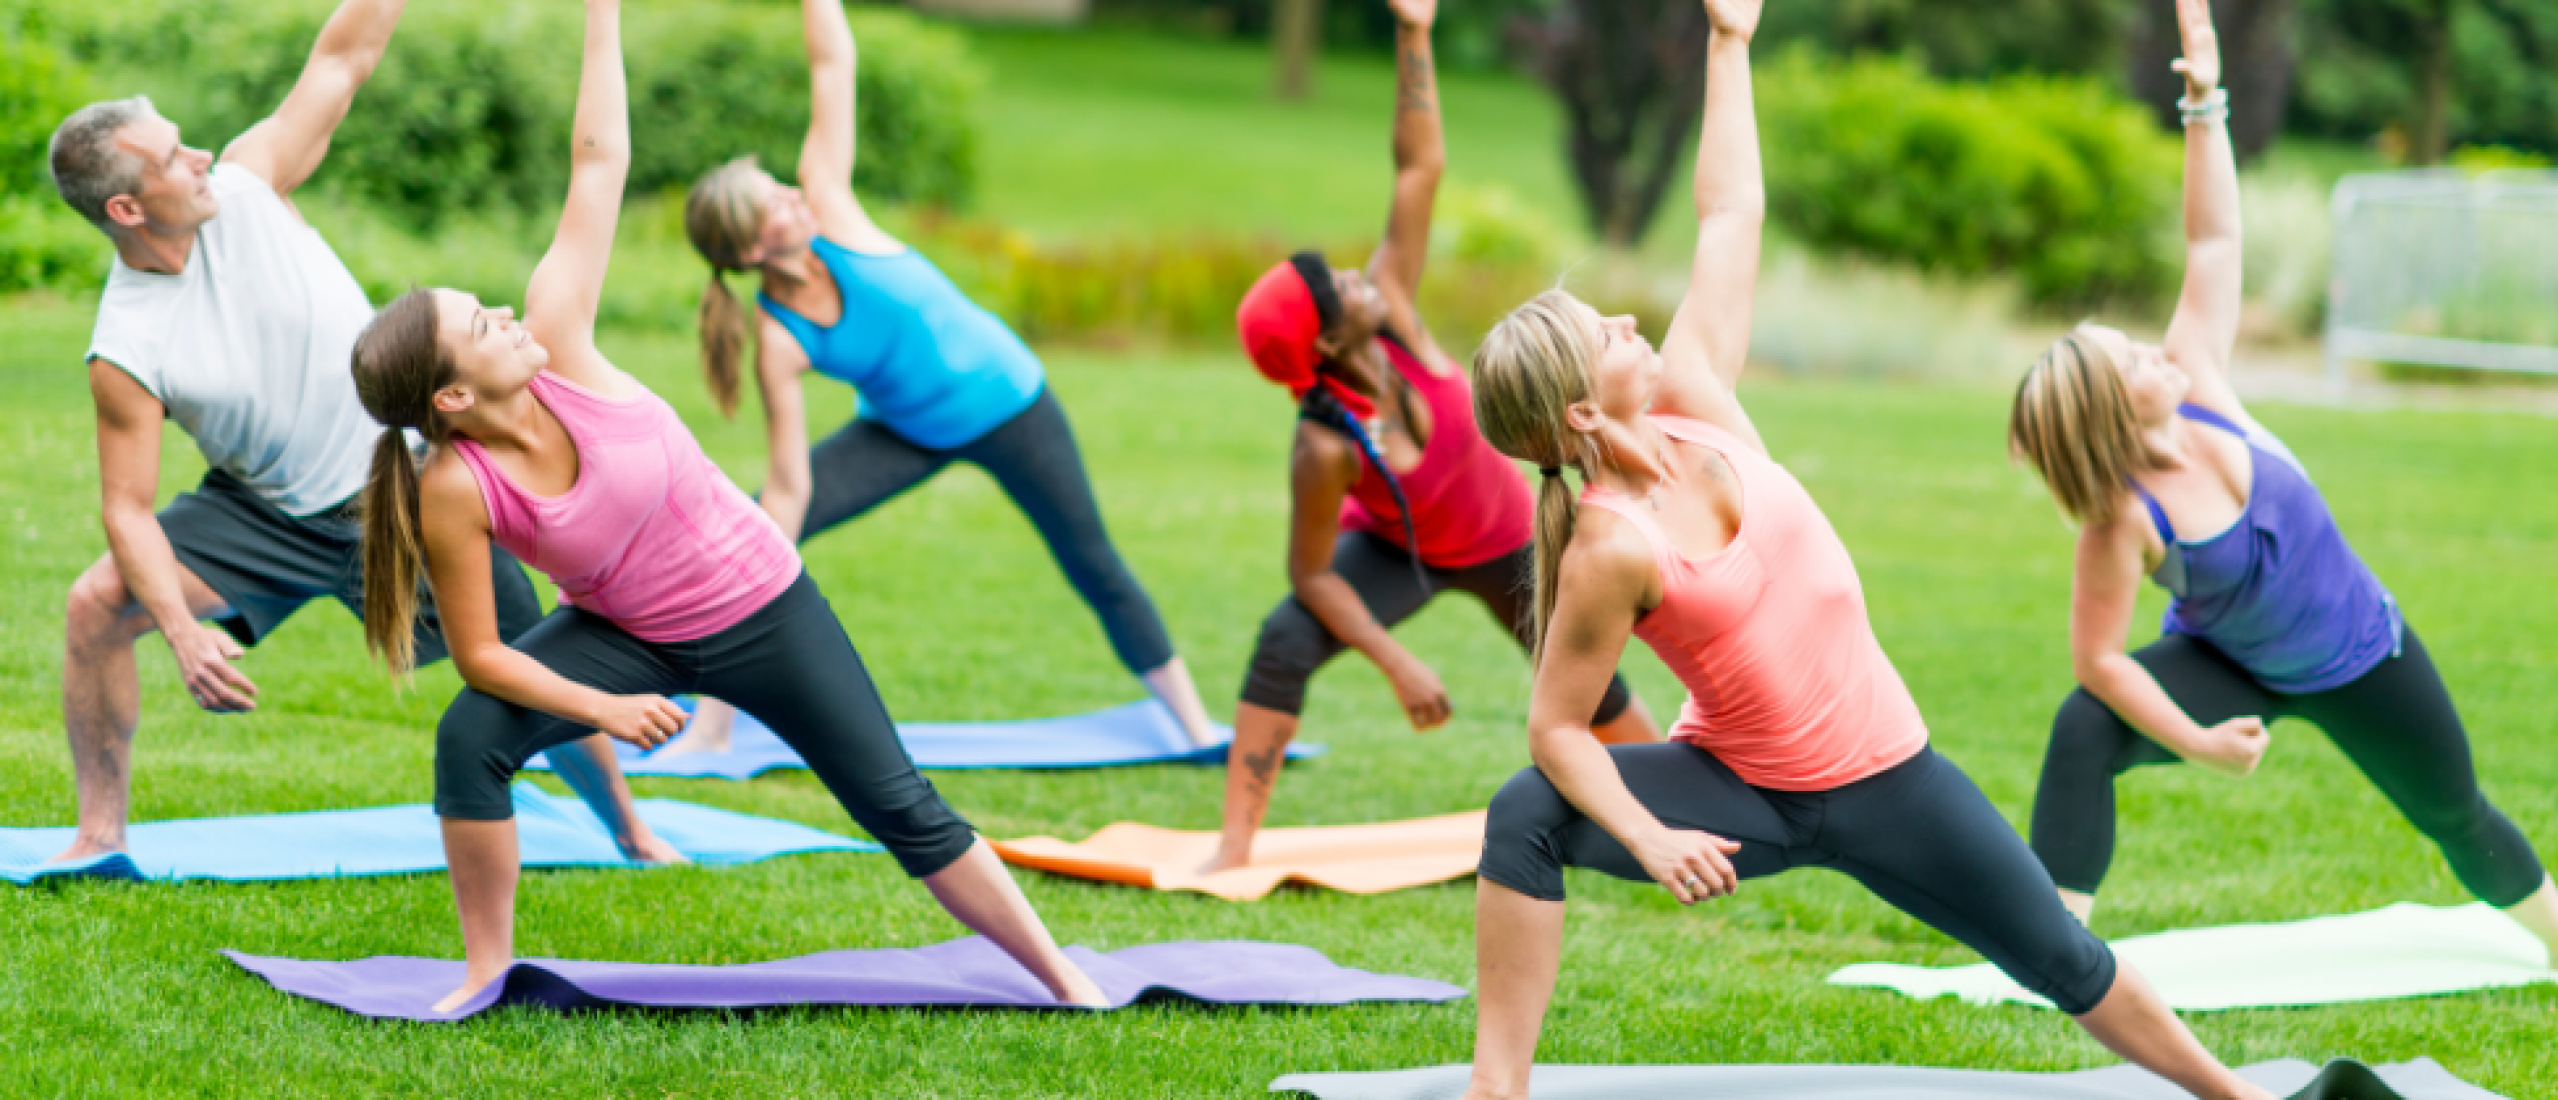 Can You Lose Weight Doing Yoga? (The Answer is Yes!)